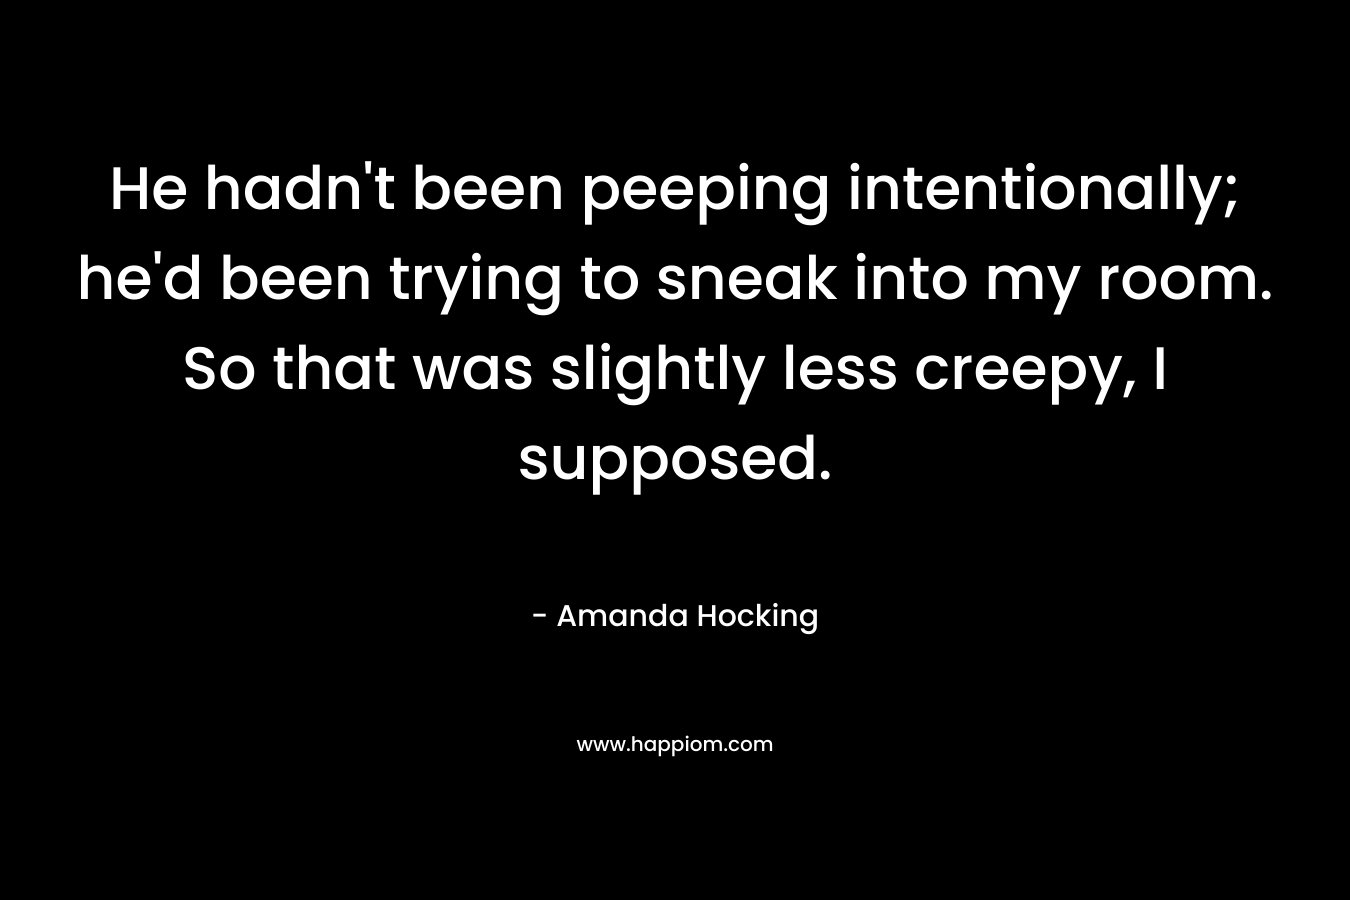 He hadn’t been peeping intentionally; he’d been trying to sneak into my room. So that was slightly less creepy, I supposed. – Amanda Hocking